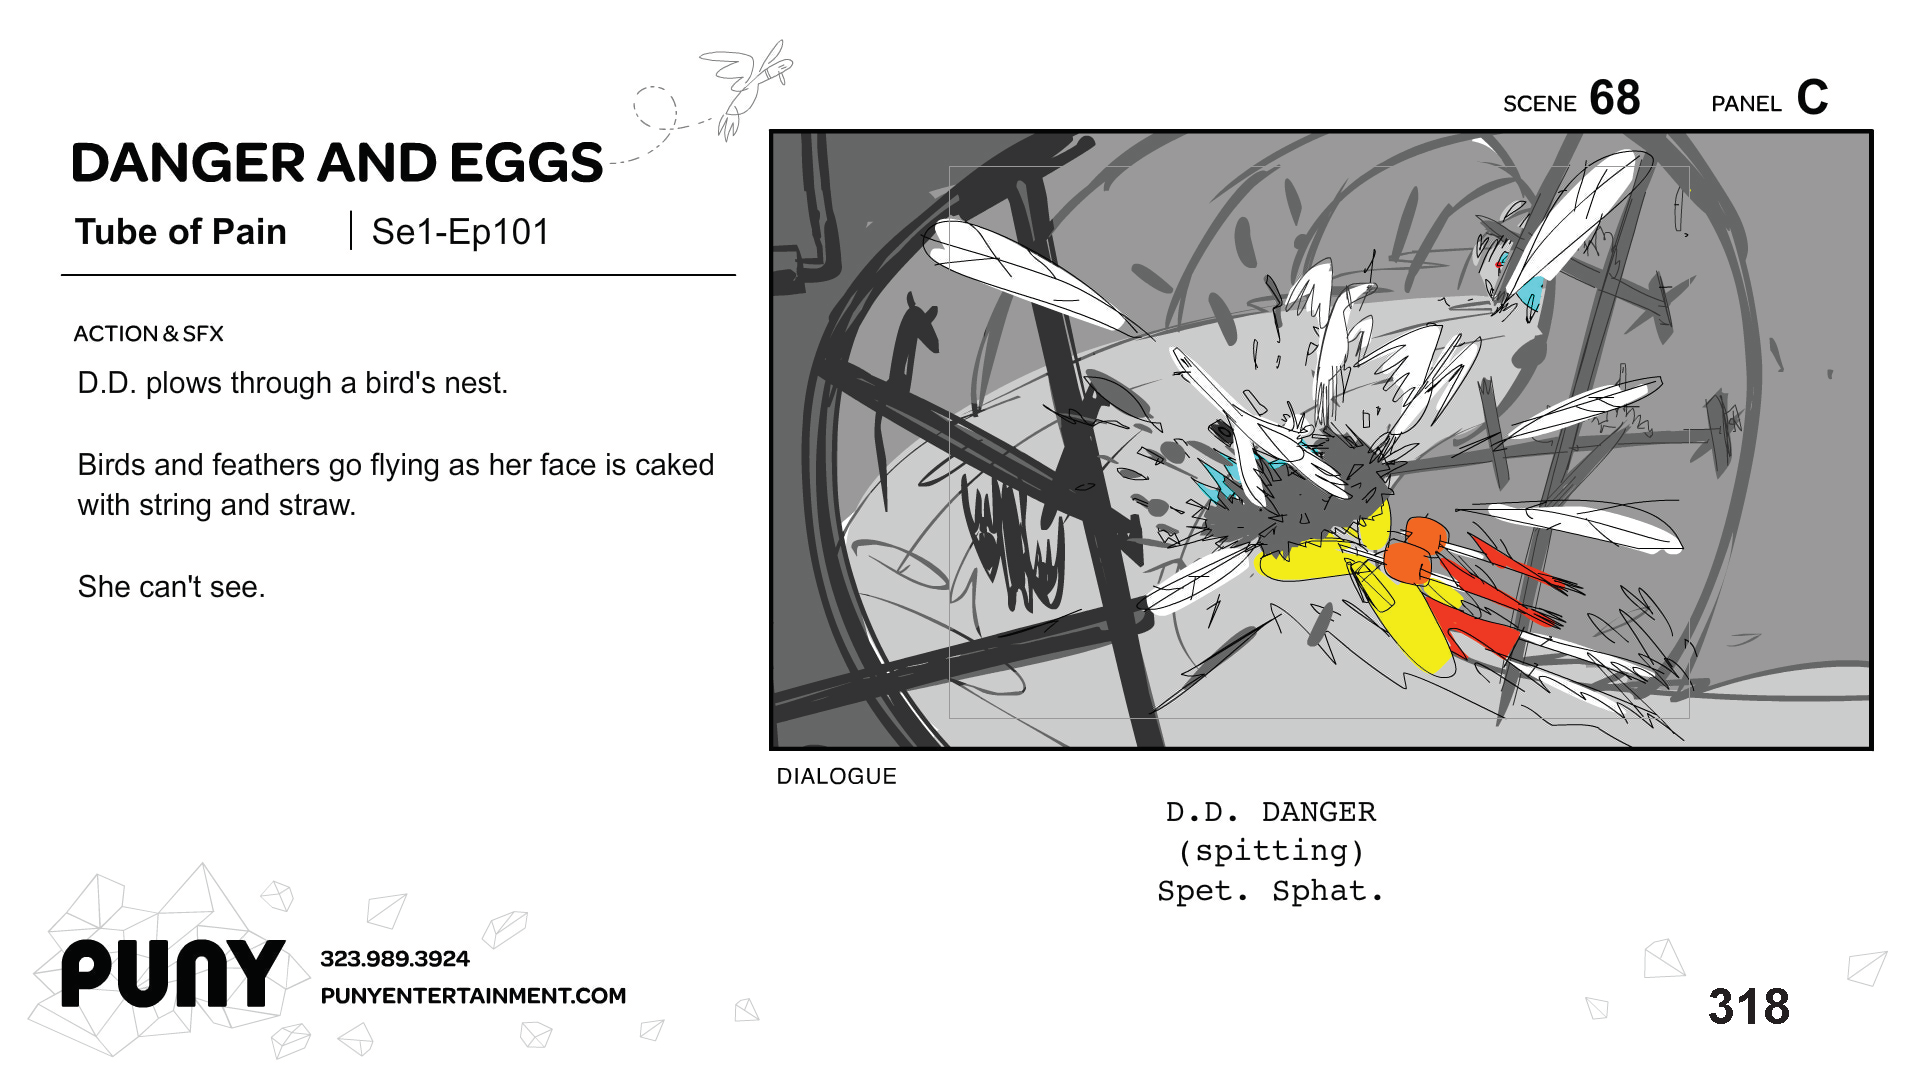 MikeOwens_STORYBOARDS_DangerAndEggs_Page_213.png